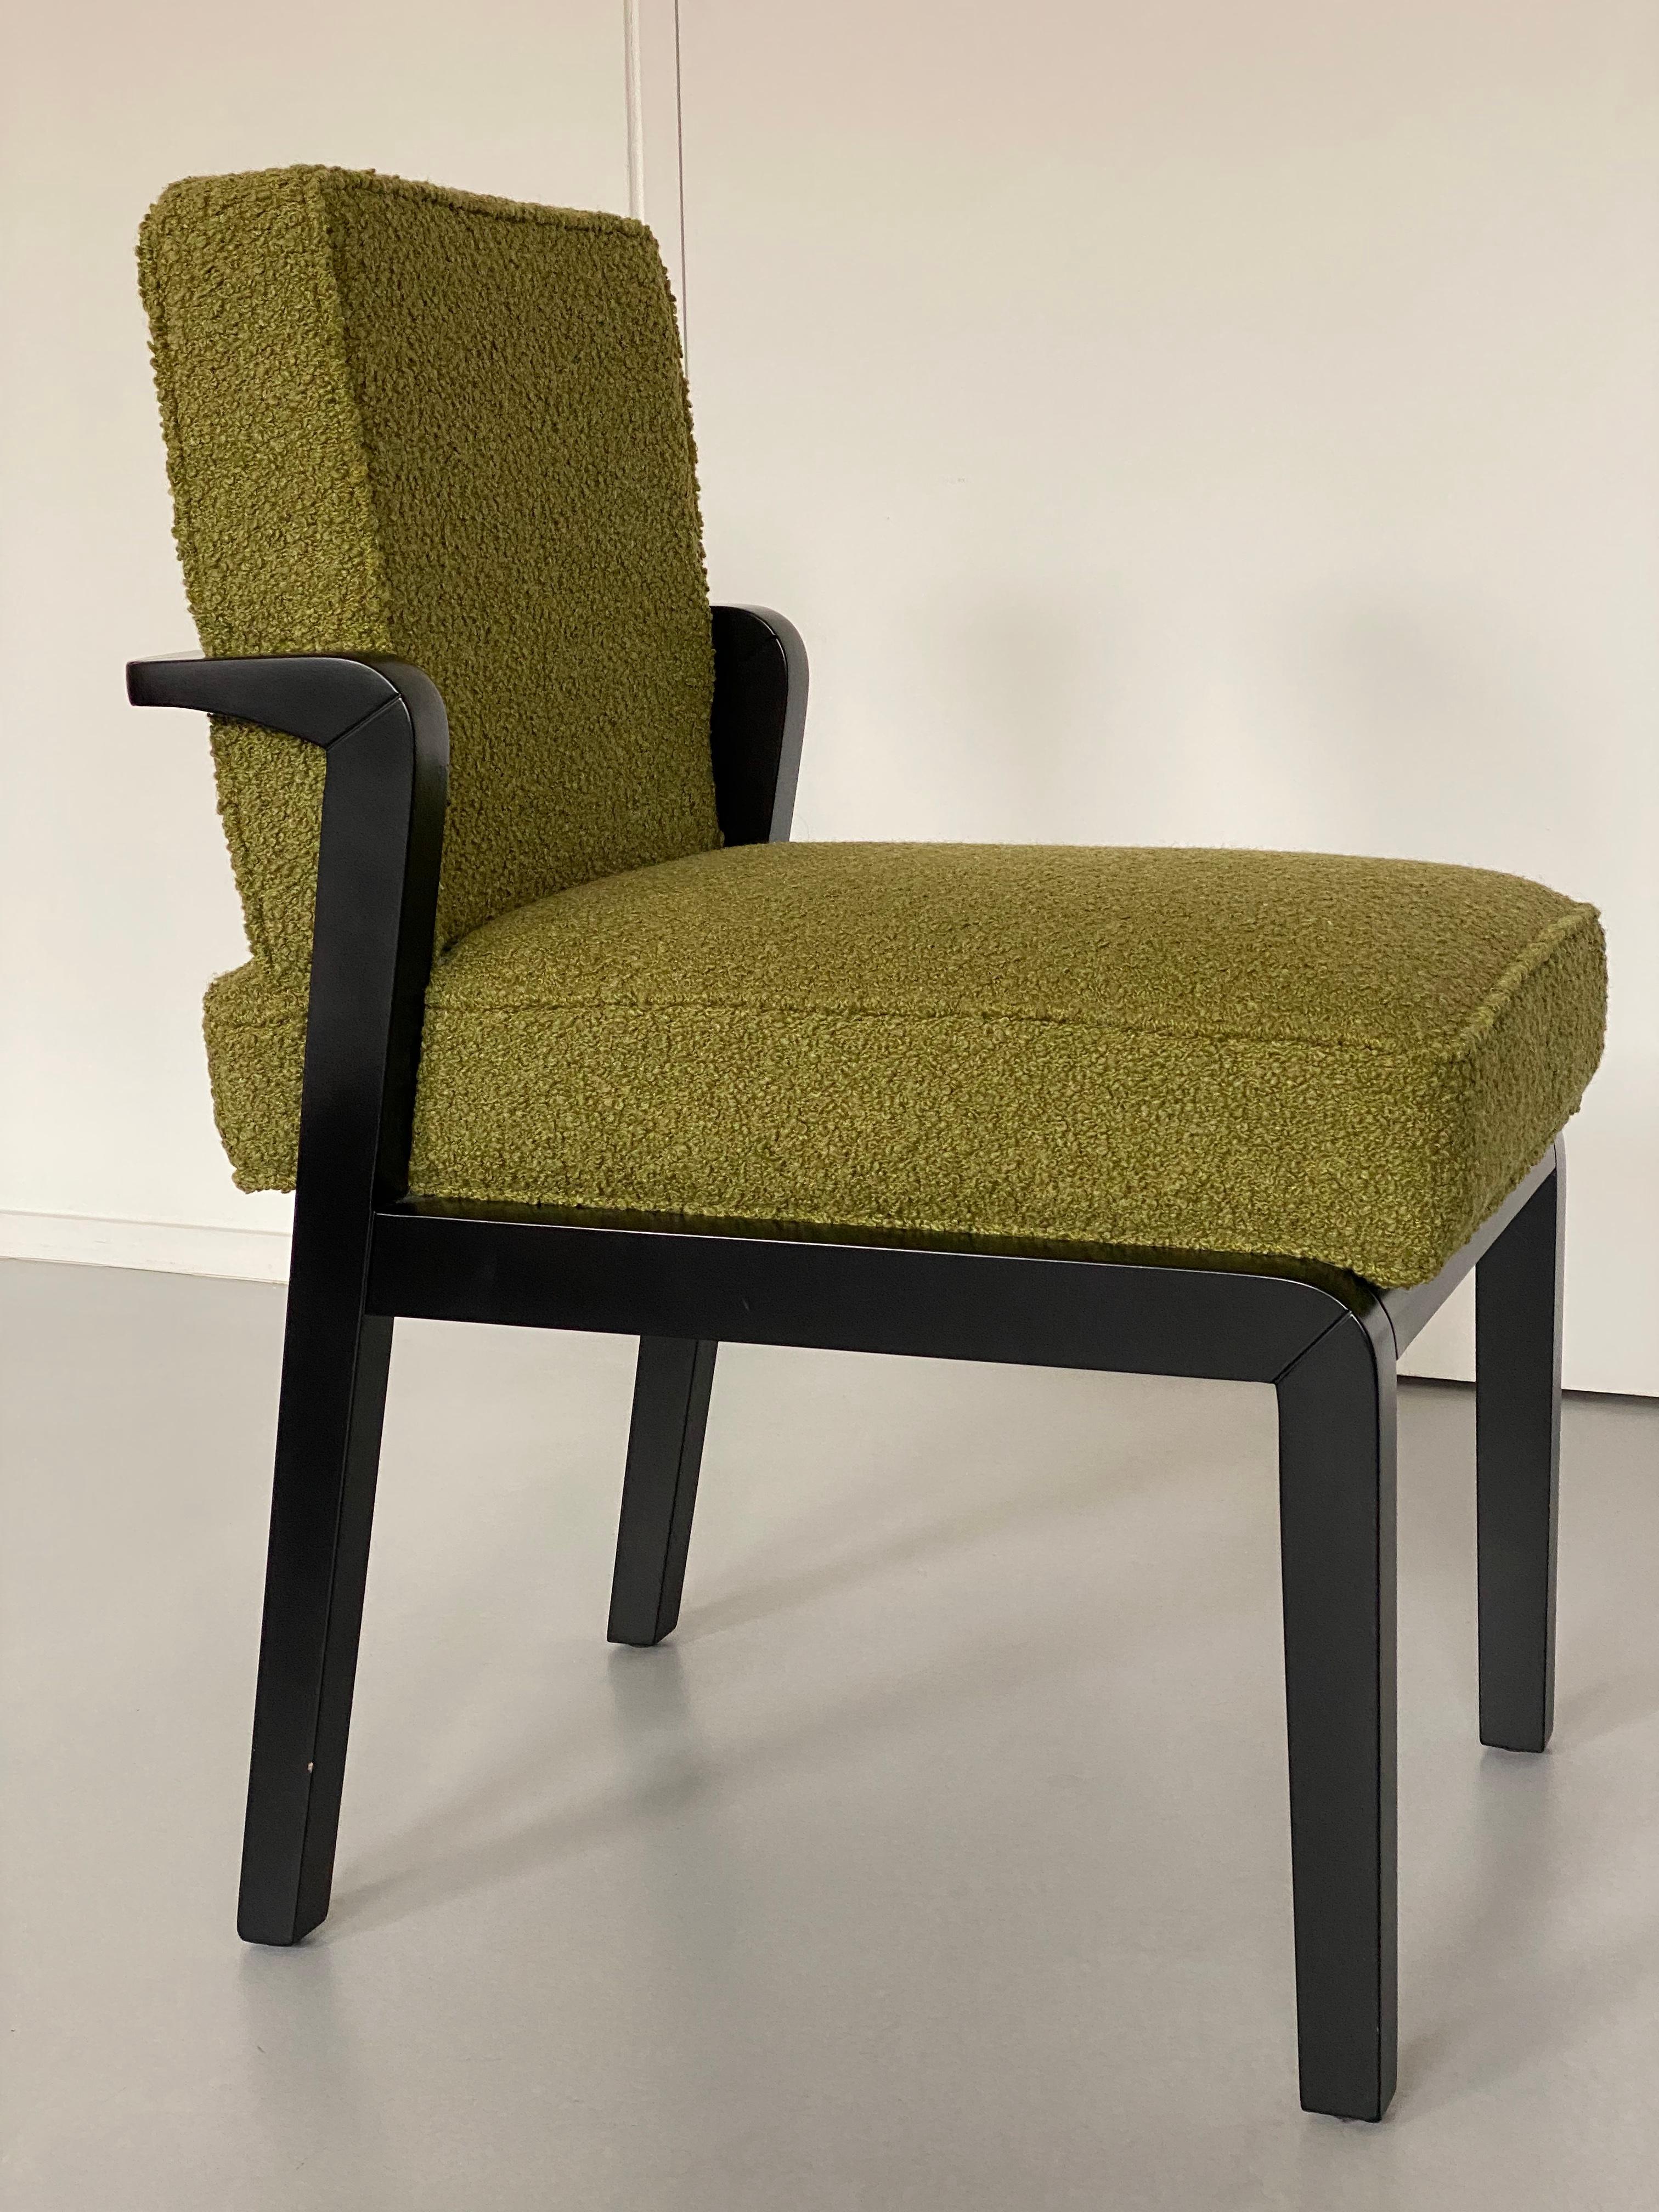 Custom Made Atena Dining Chair in Black Ebony & Green Bouclé Upholstery For Sale 1